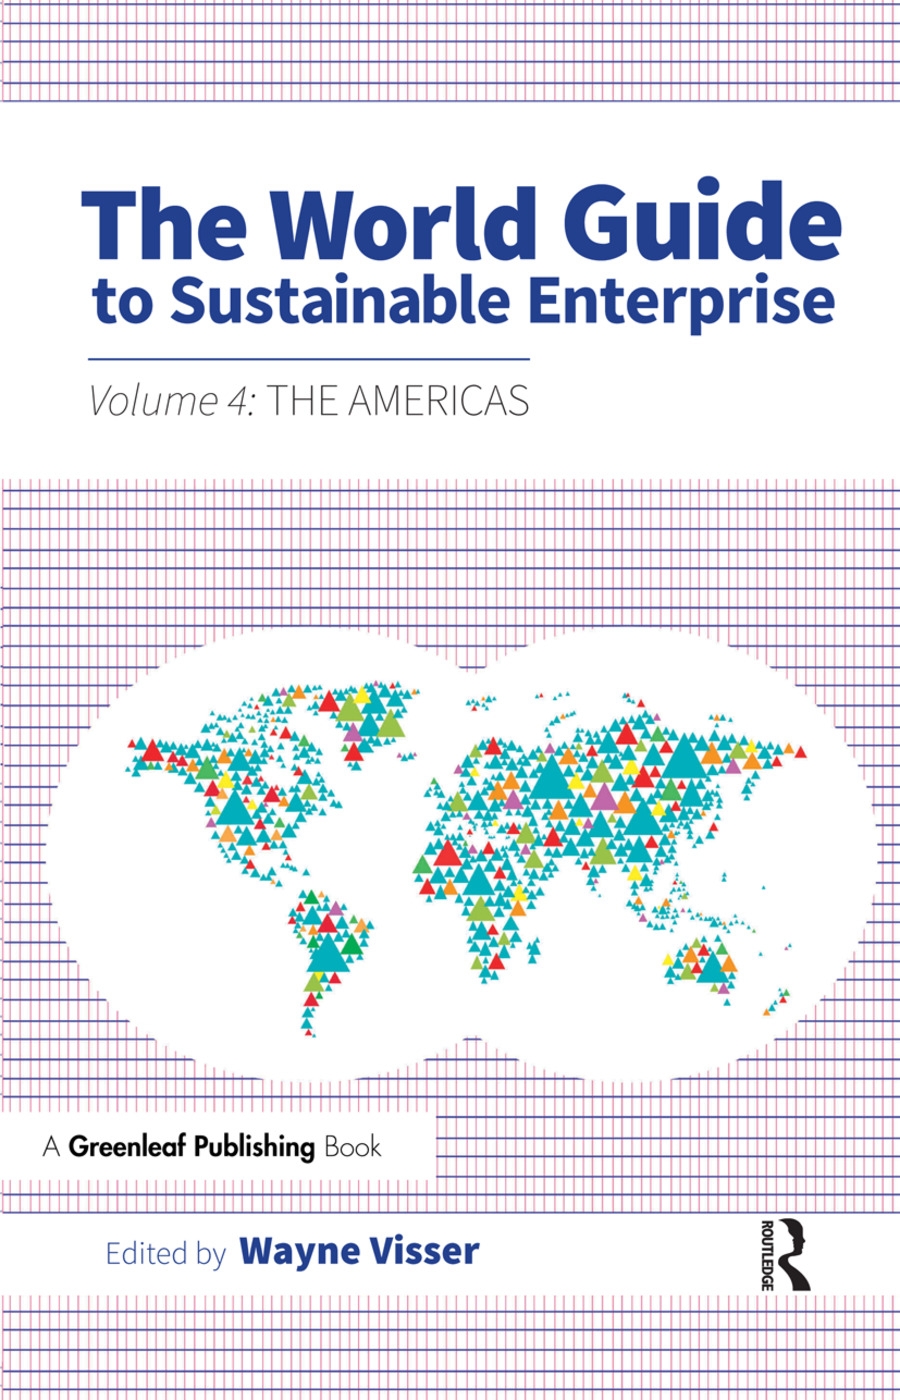 The World Guide to Sustainable Enterprise: The Americas